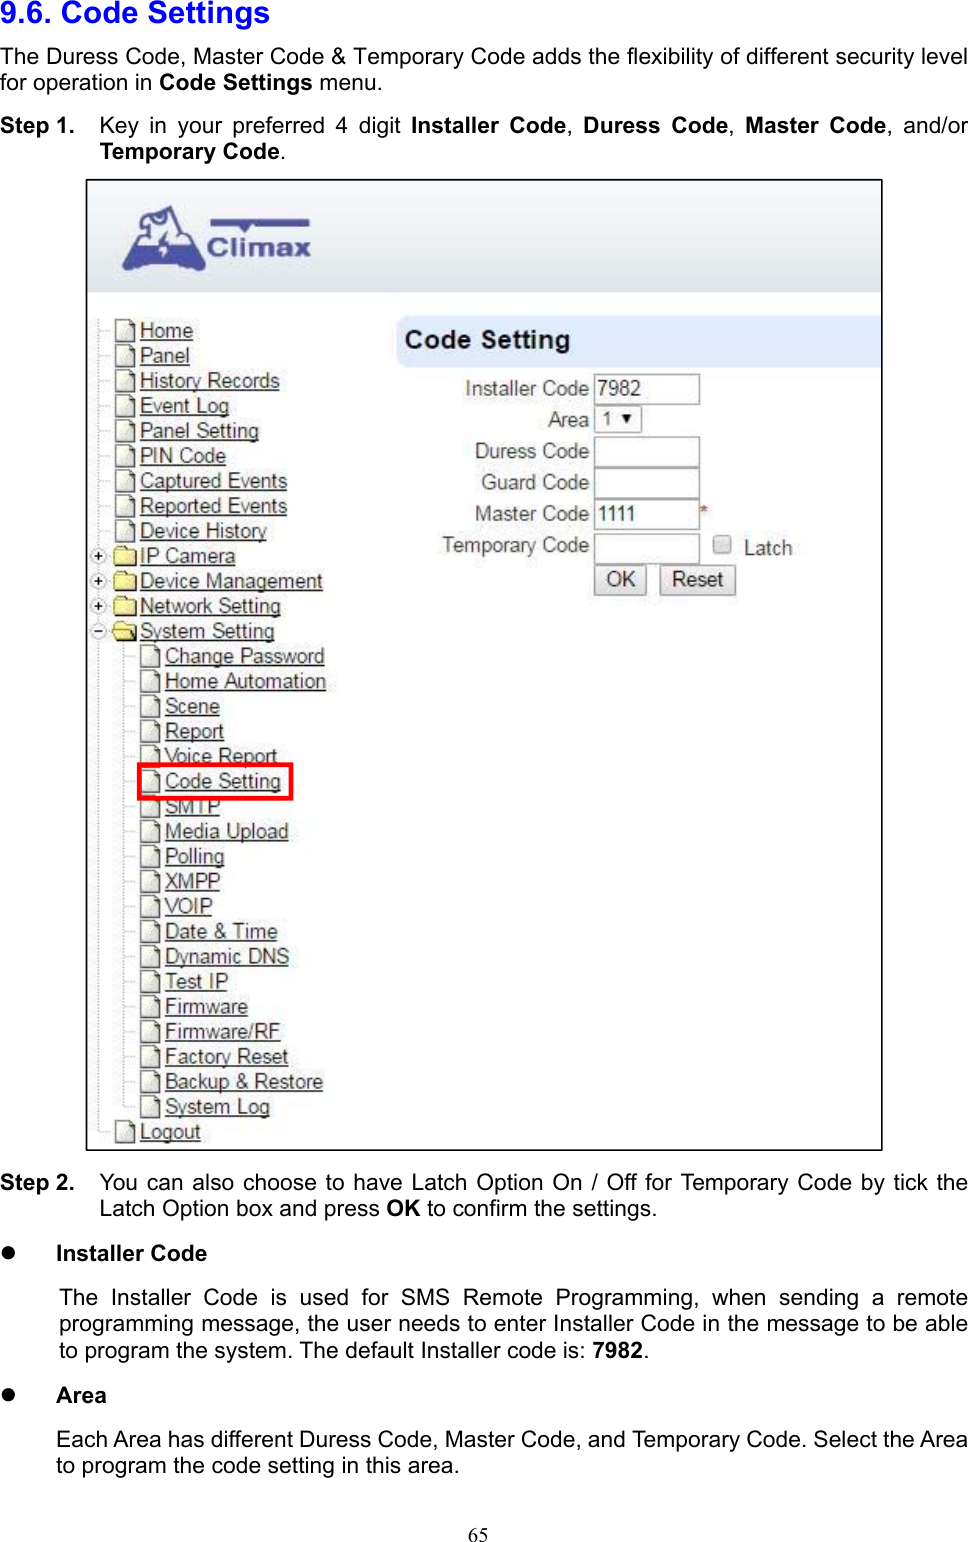  659.6. Code Settings   The Duress Code, Master Code &amp; Temporary Code adds the flexibility of different security level for operation in Code Settings menu. Step 1.  Key  in  your  preferred  4  digit  Installer  Code,  Duress  Code,  Master  Code,  and/or Temporary Code.  Step 2.  You can  also choose to have Latch Option On / Off for Temporary Code by  tick the Latch Option box and press OK to confirm the settings.    Installer Code The  Installer  Code  is  used  for  SMS  Remote  Programming,  when  sending  a  remote programming message, the user needs to enter Installer Code in the message to be able to program the system. The default Installer code is: 7982.  Area Each Area has different Duress Code, Master Code, and Temporary Code. Select the Area to program the code setting in this area. 